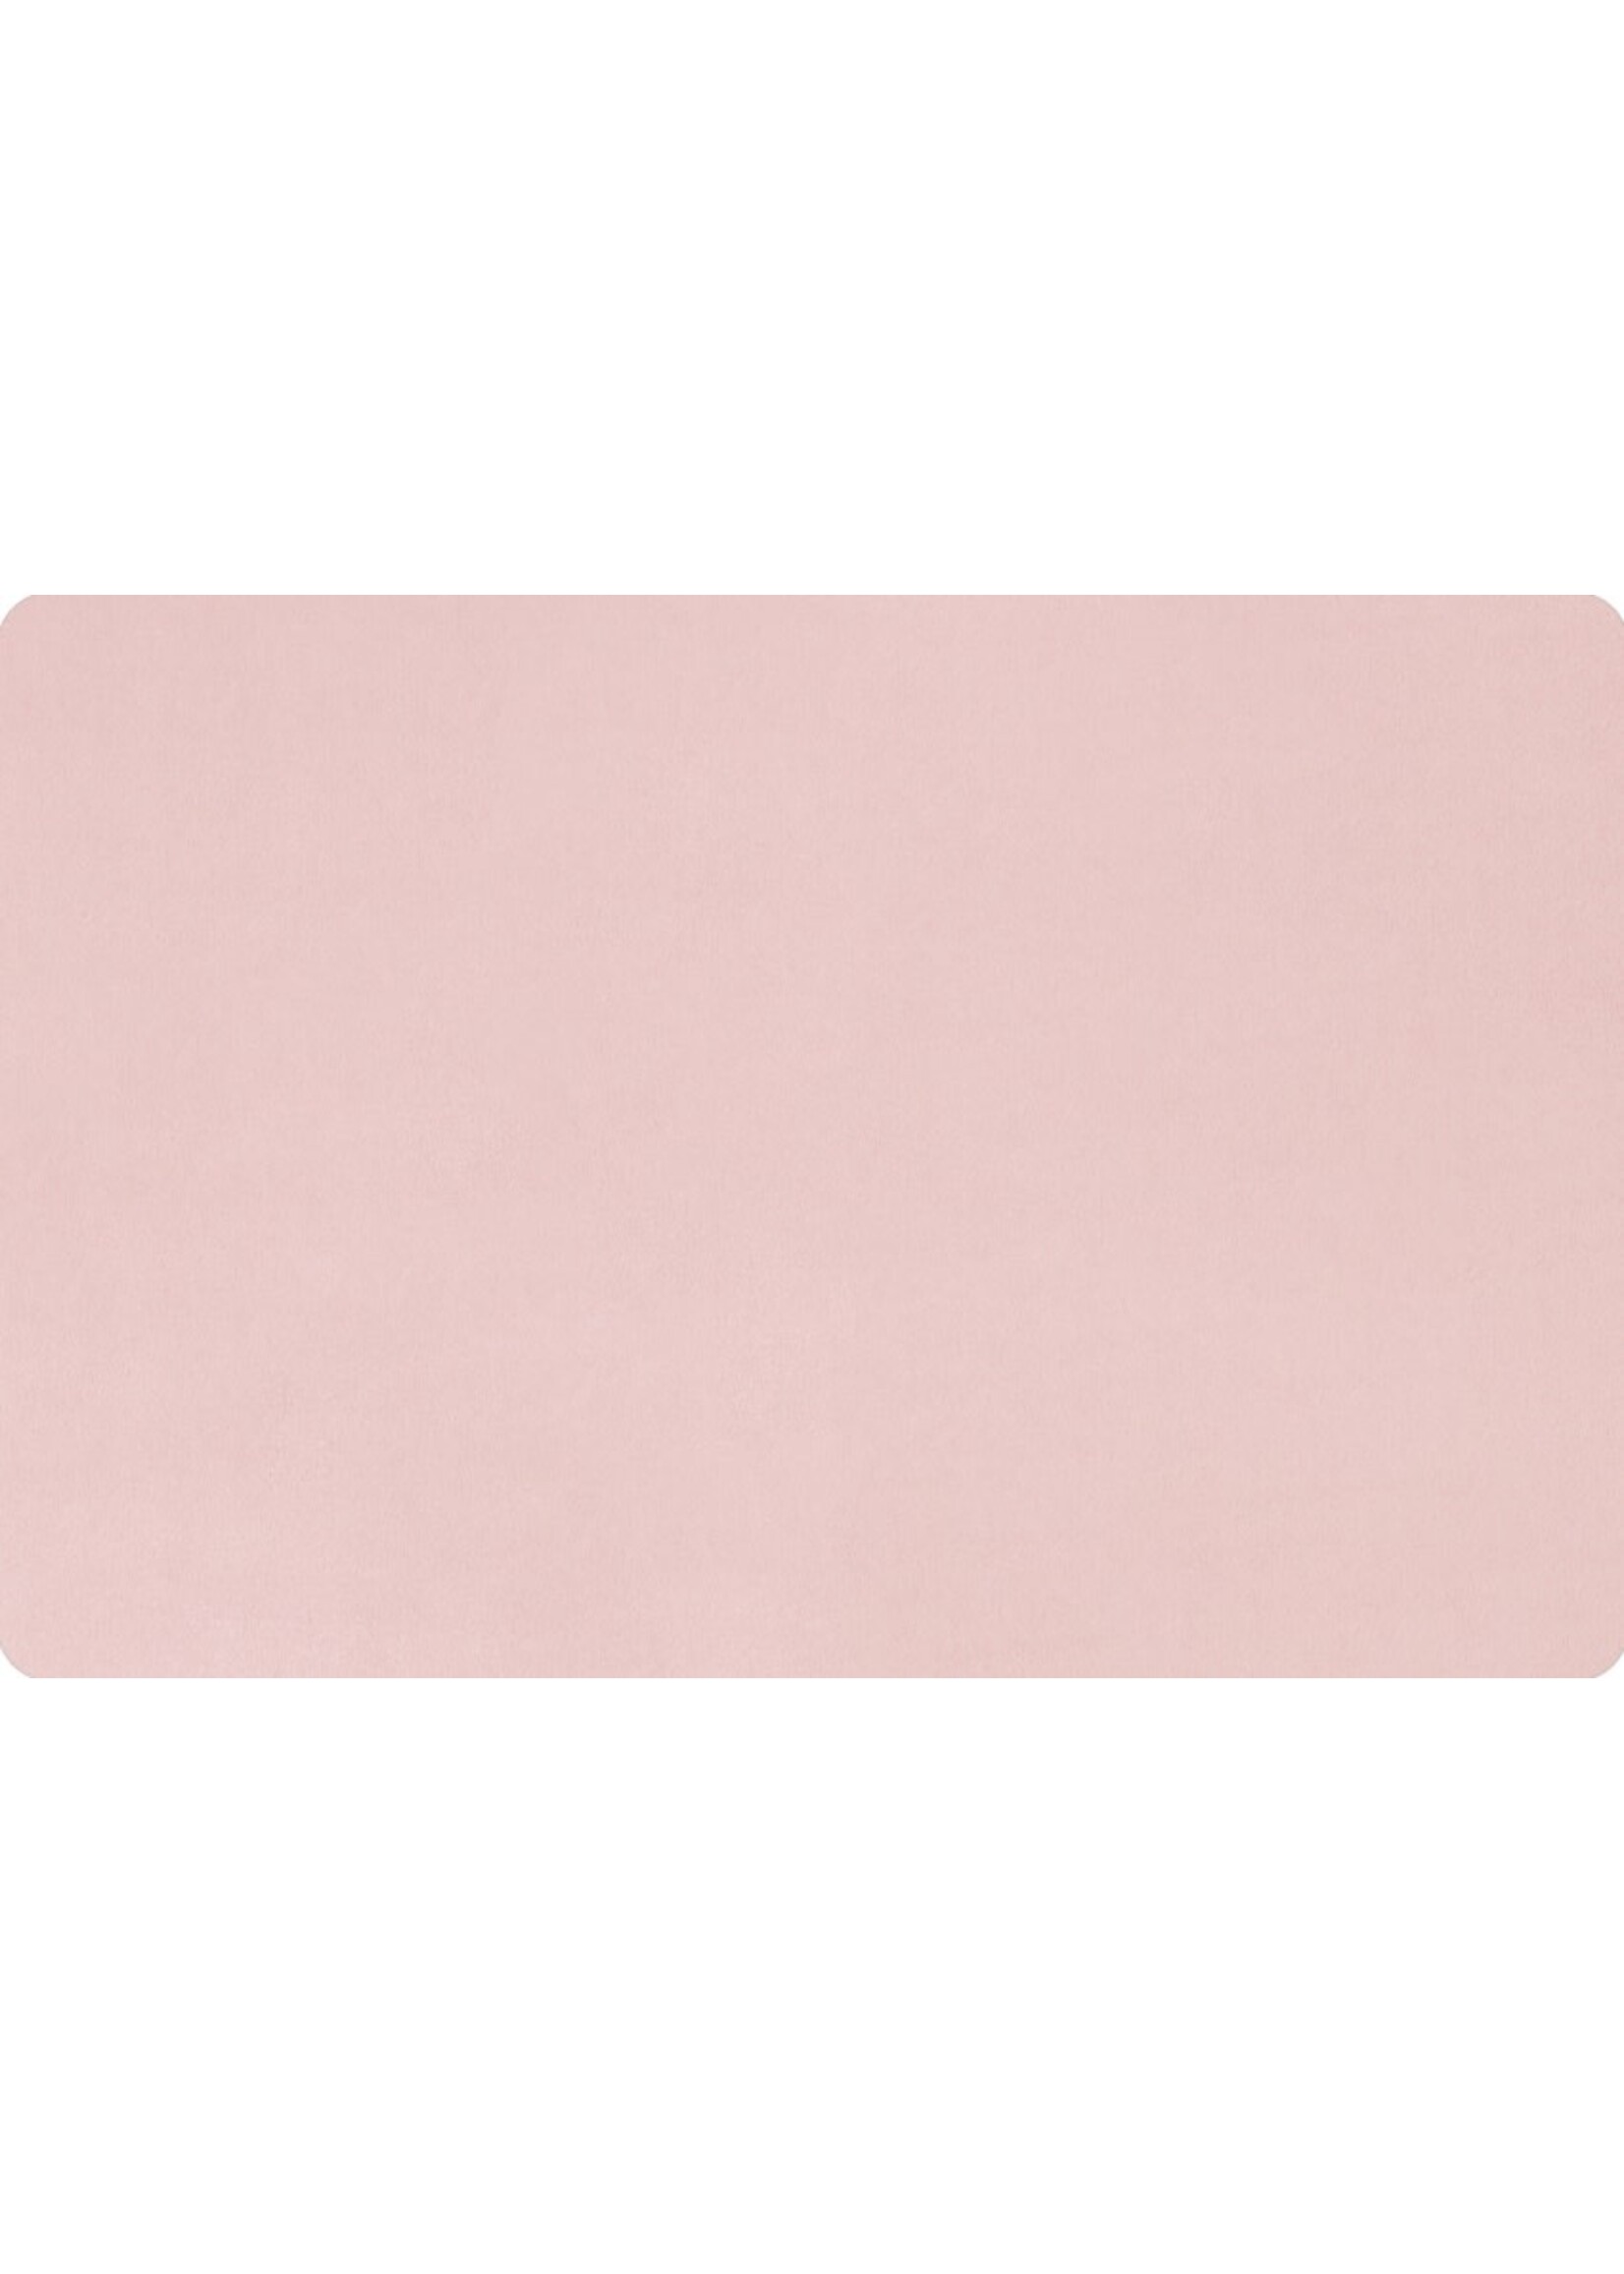 Shannon Fabrics Minky, Rosewater Extra Wide Solid Cuddle3, 90" , (by the inch)